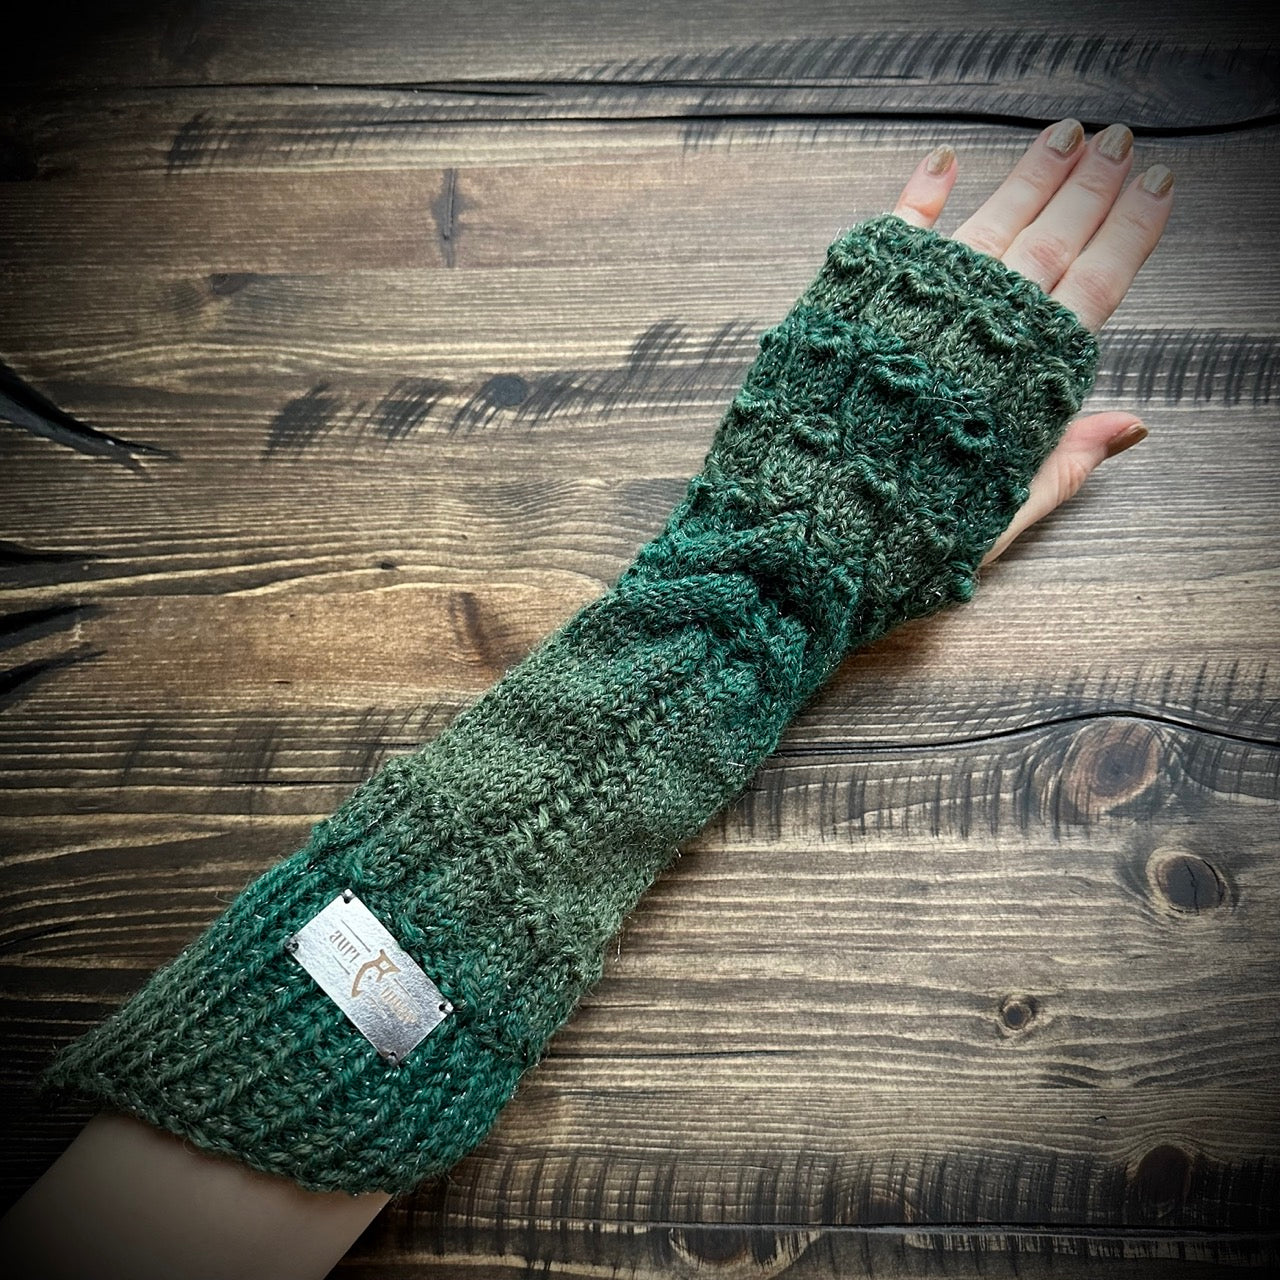 Handmade knitted sparkling green arm warmers